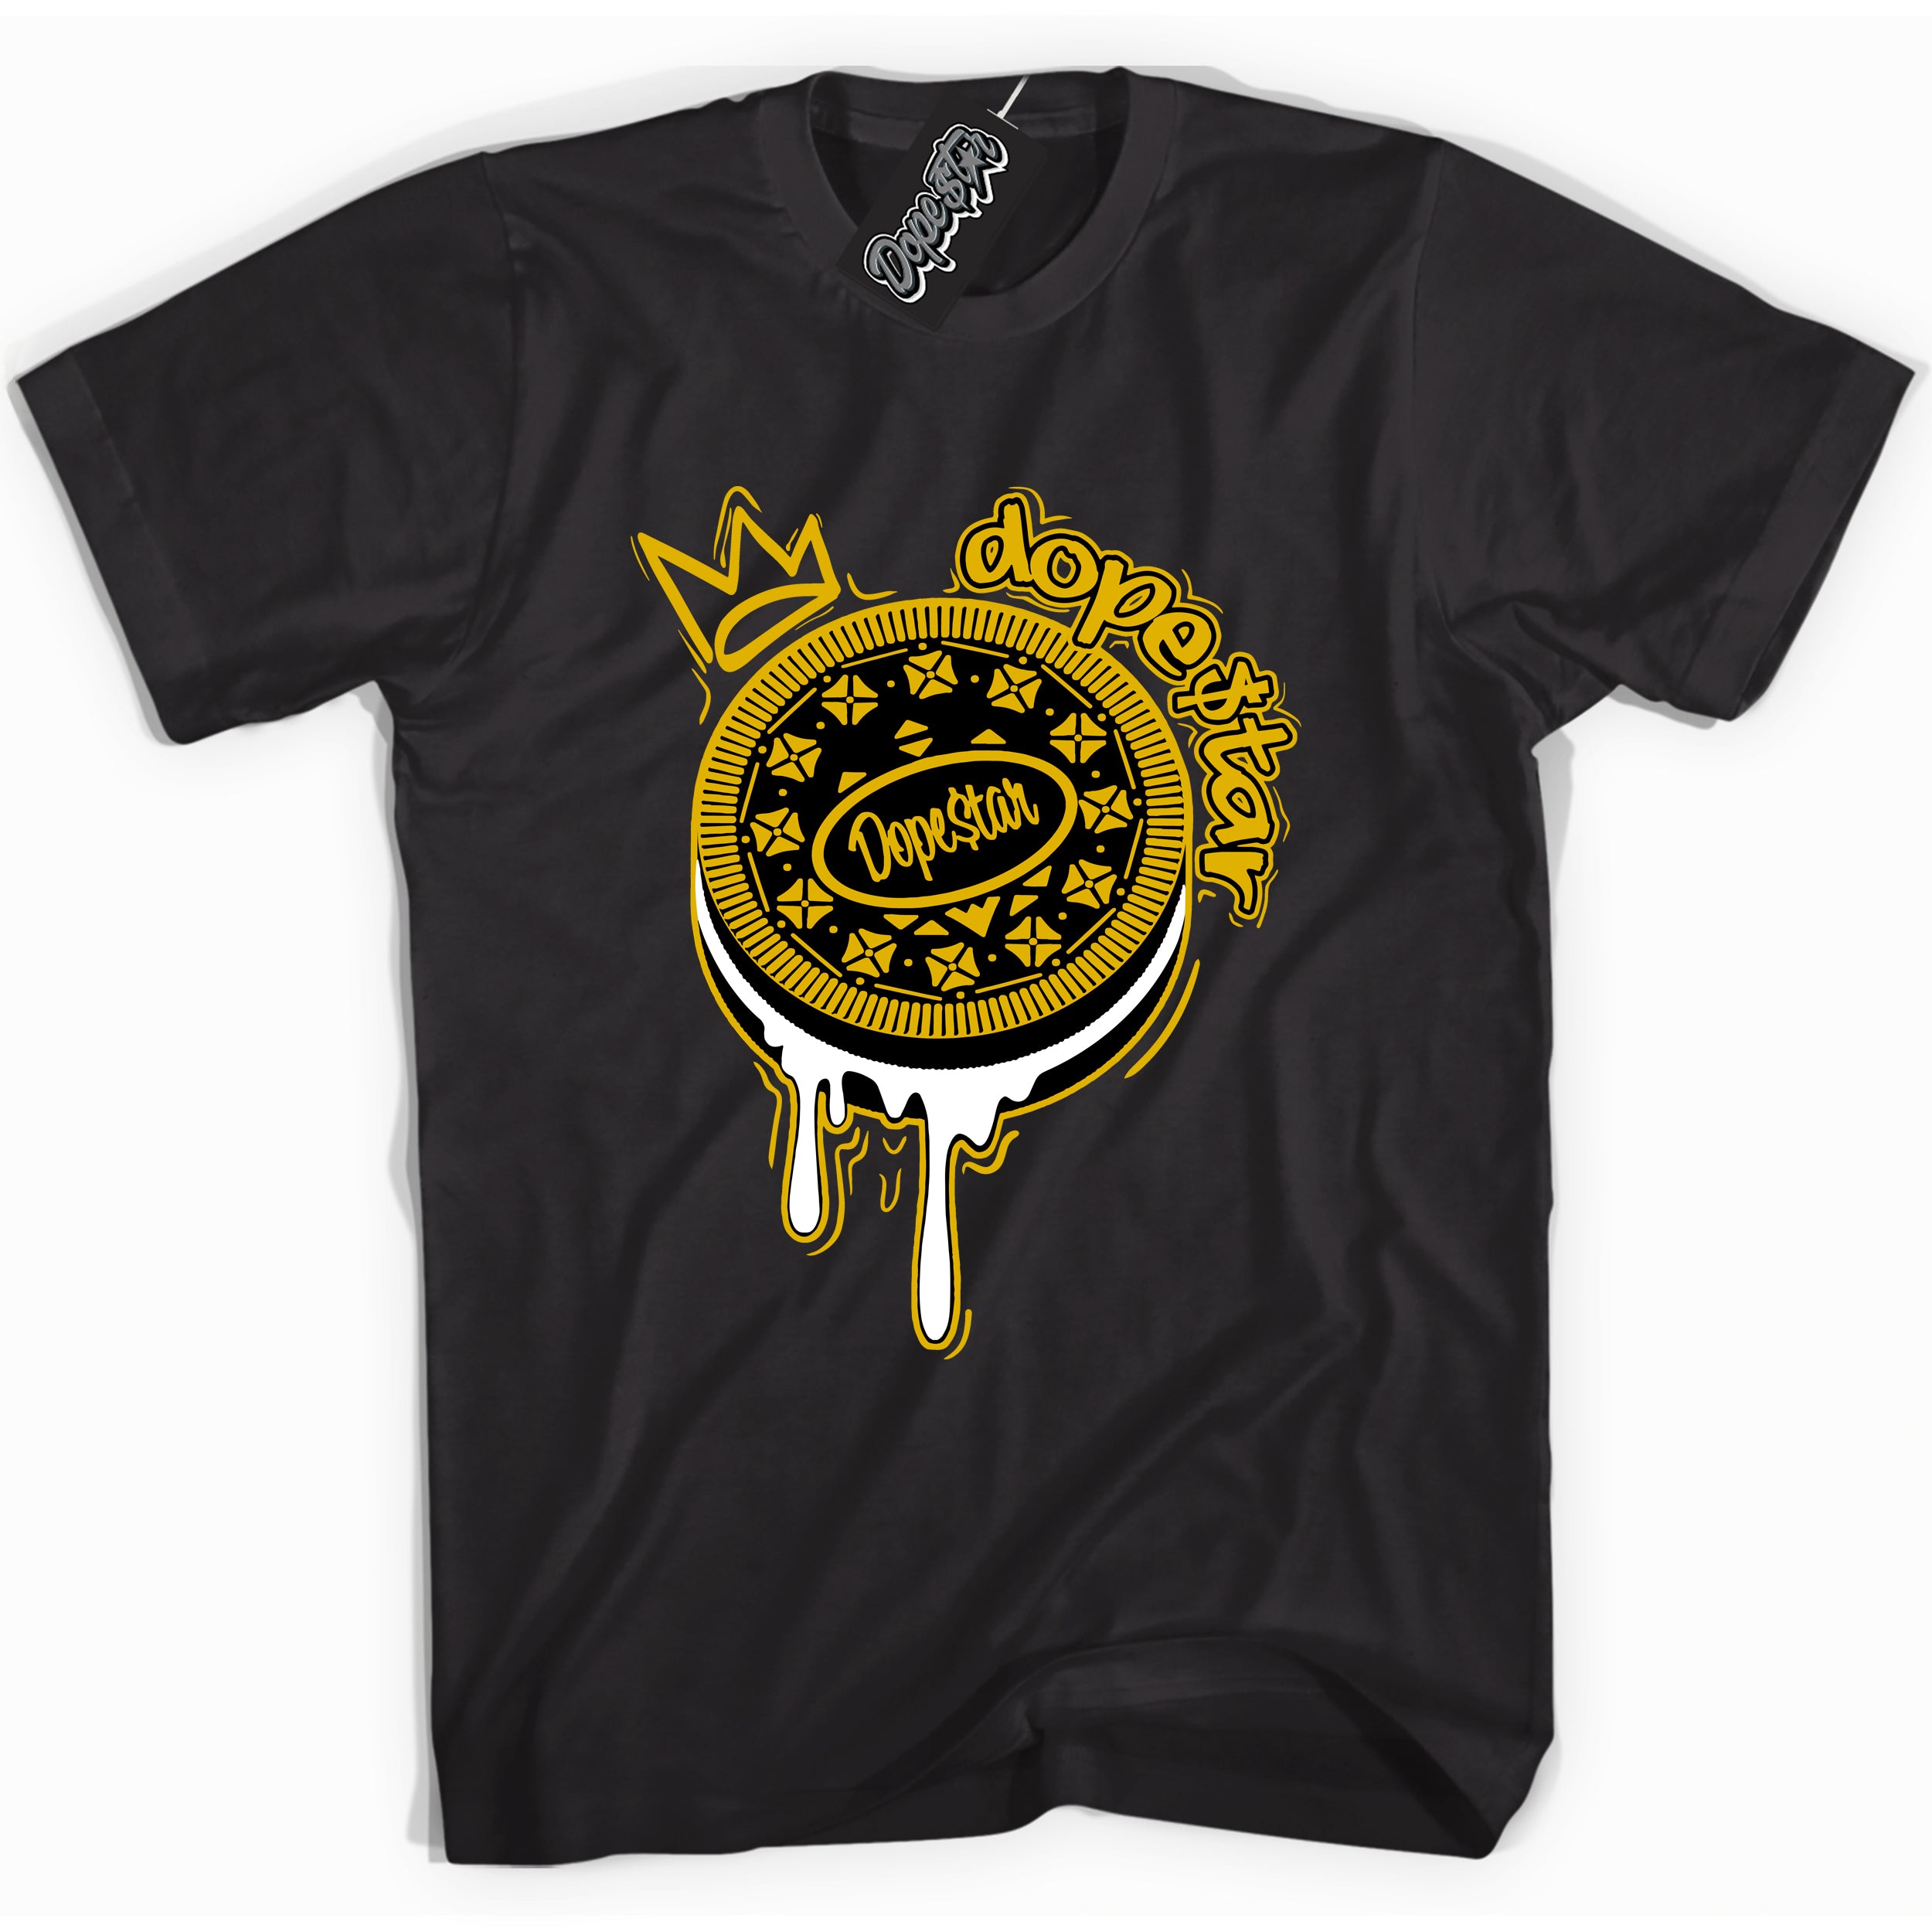 Cool Black Shirt with “ Oreo DS” design that perfectly matches Yellow Ochre 6s Sneakers.